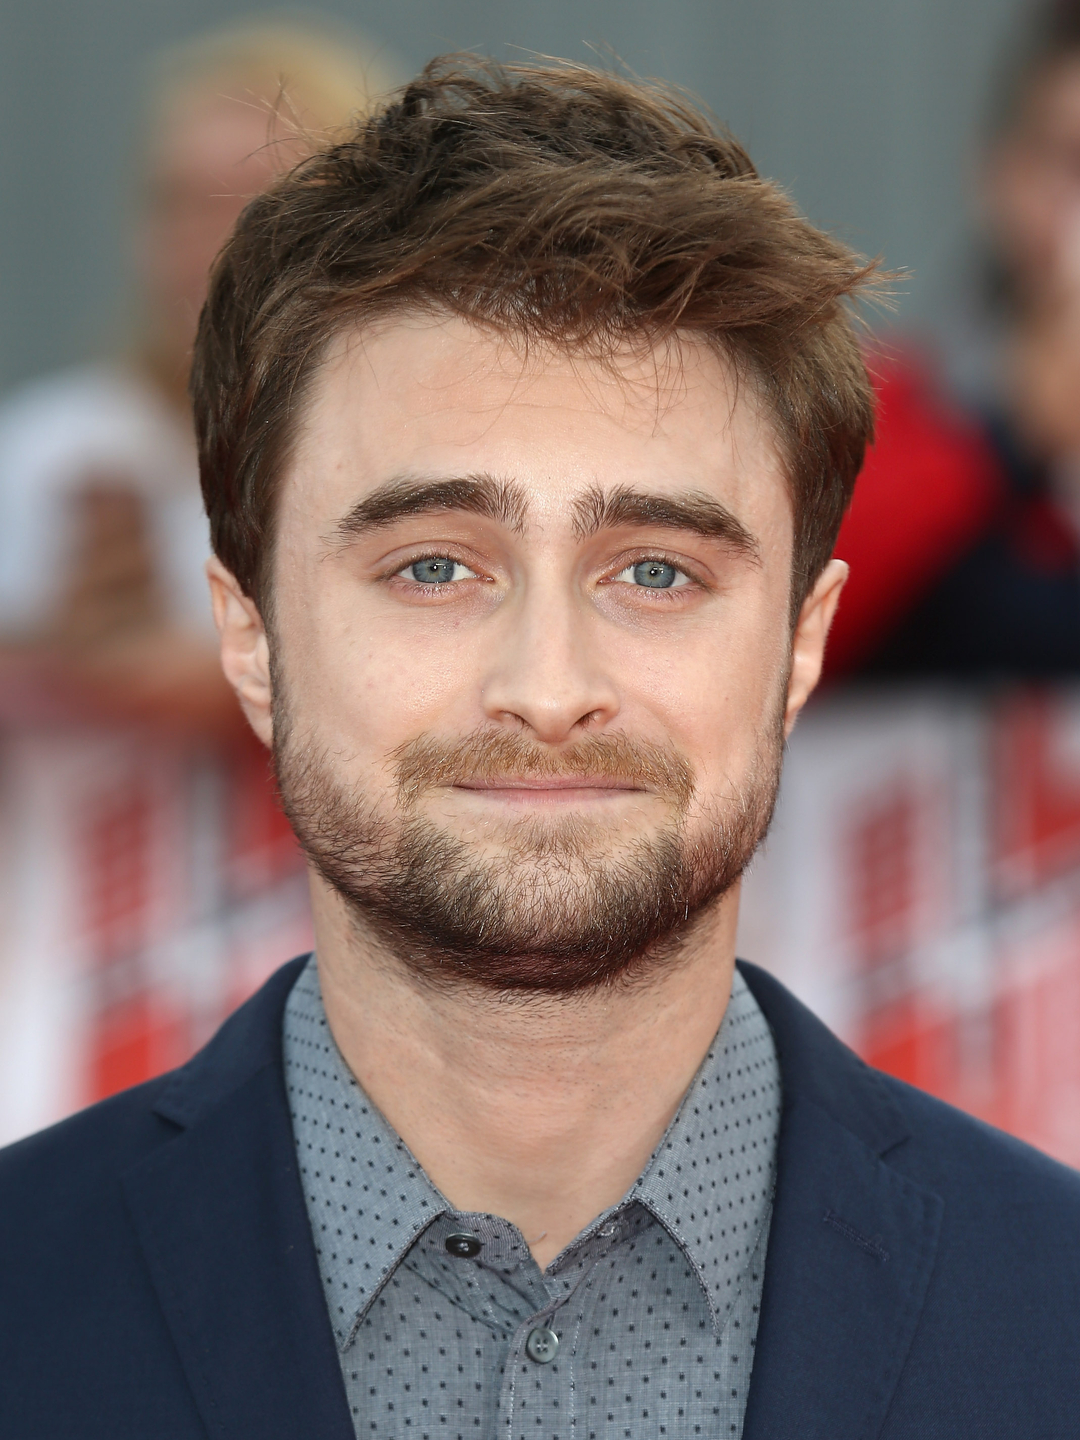 Daniel Radcliffe who is his father